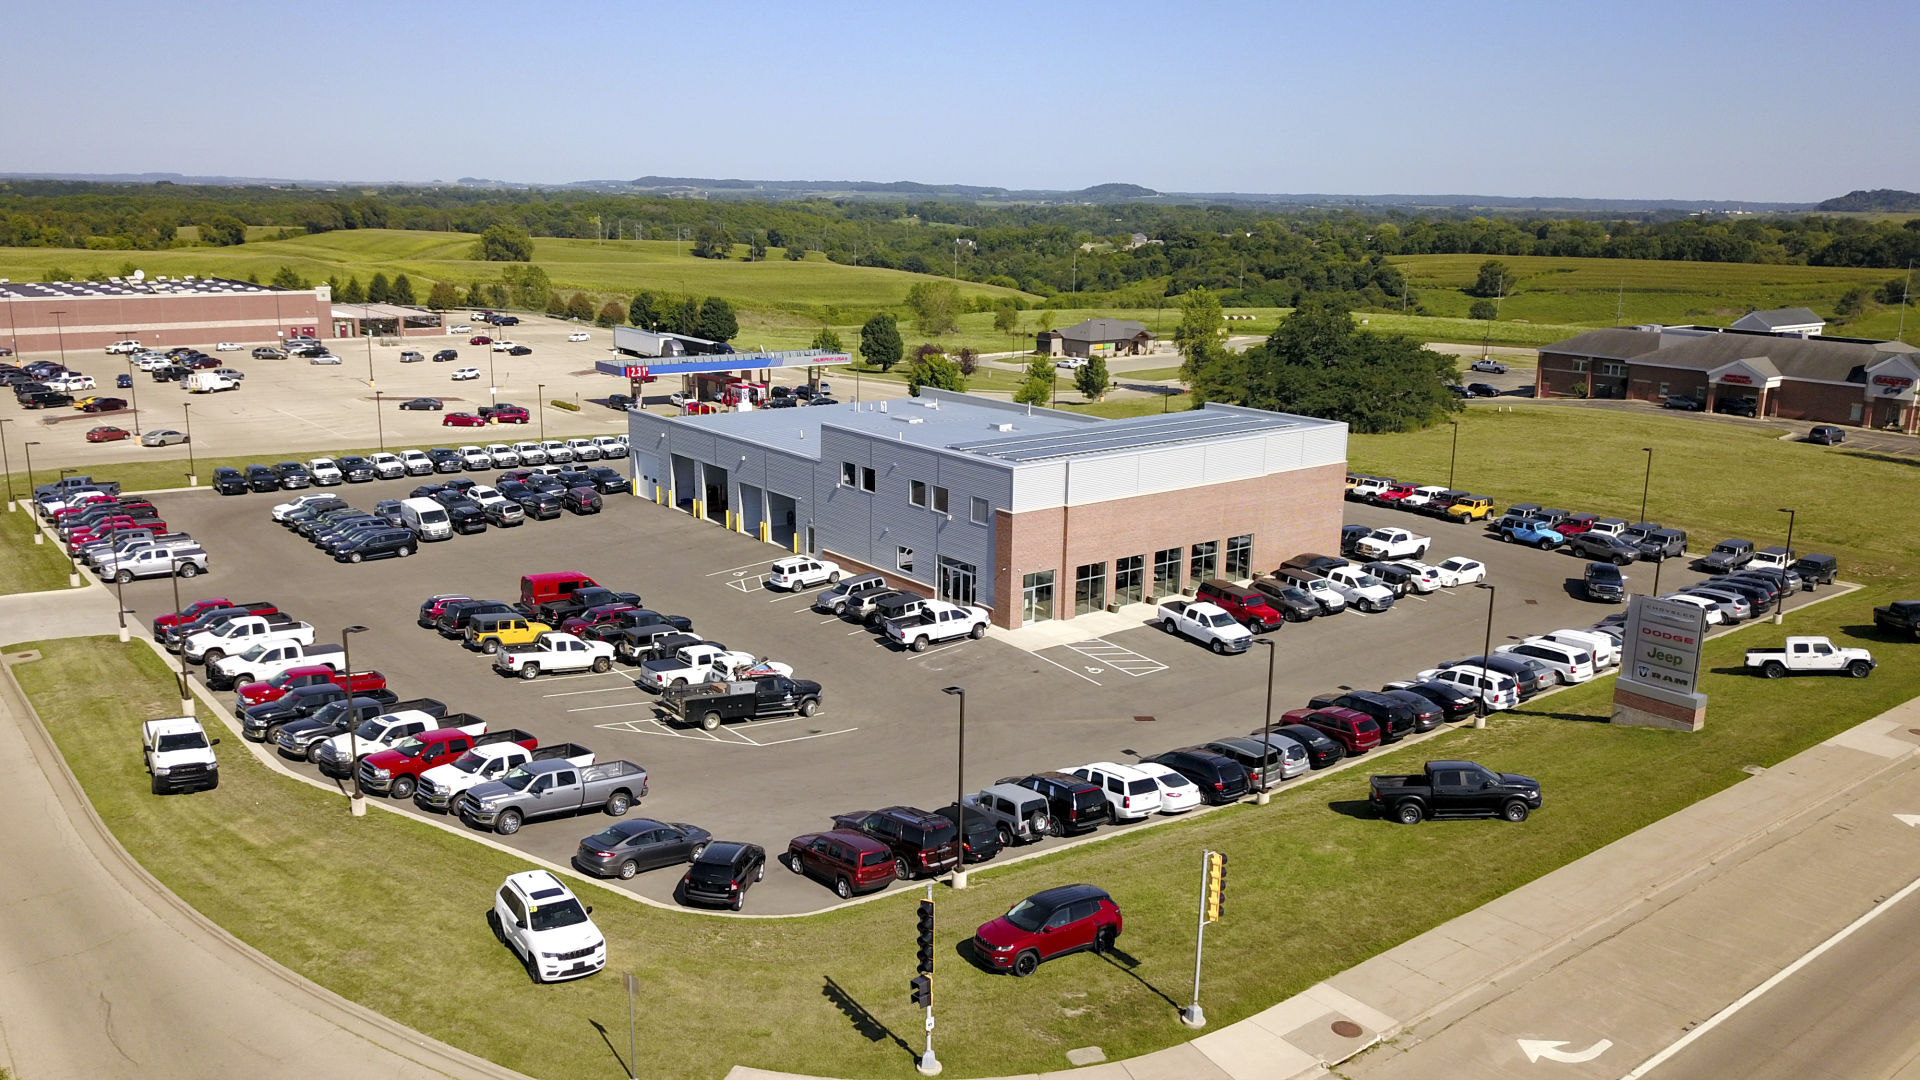 The new Galena Chrysler Dodge Jeep dealership is located off of U.S. 20 in Galena, Ill. PHOTO CREDIT: Dave Kettering